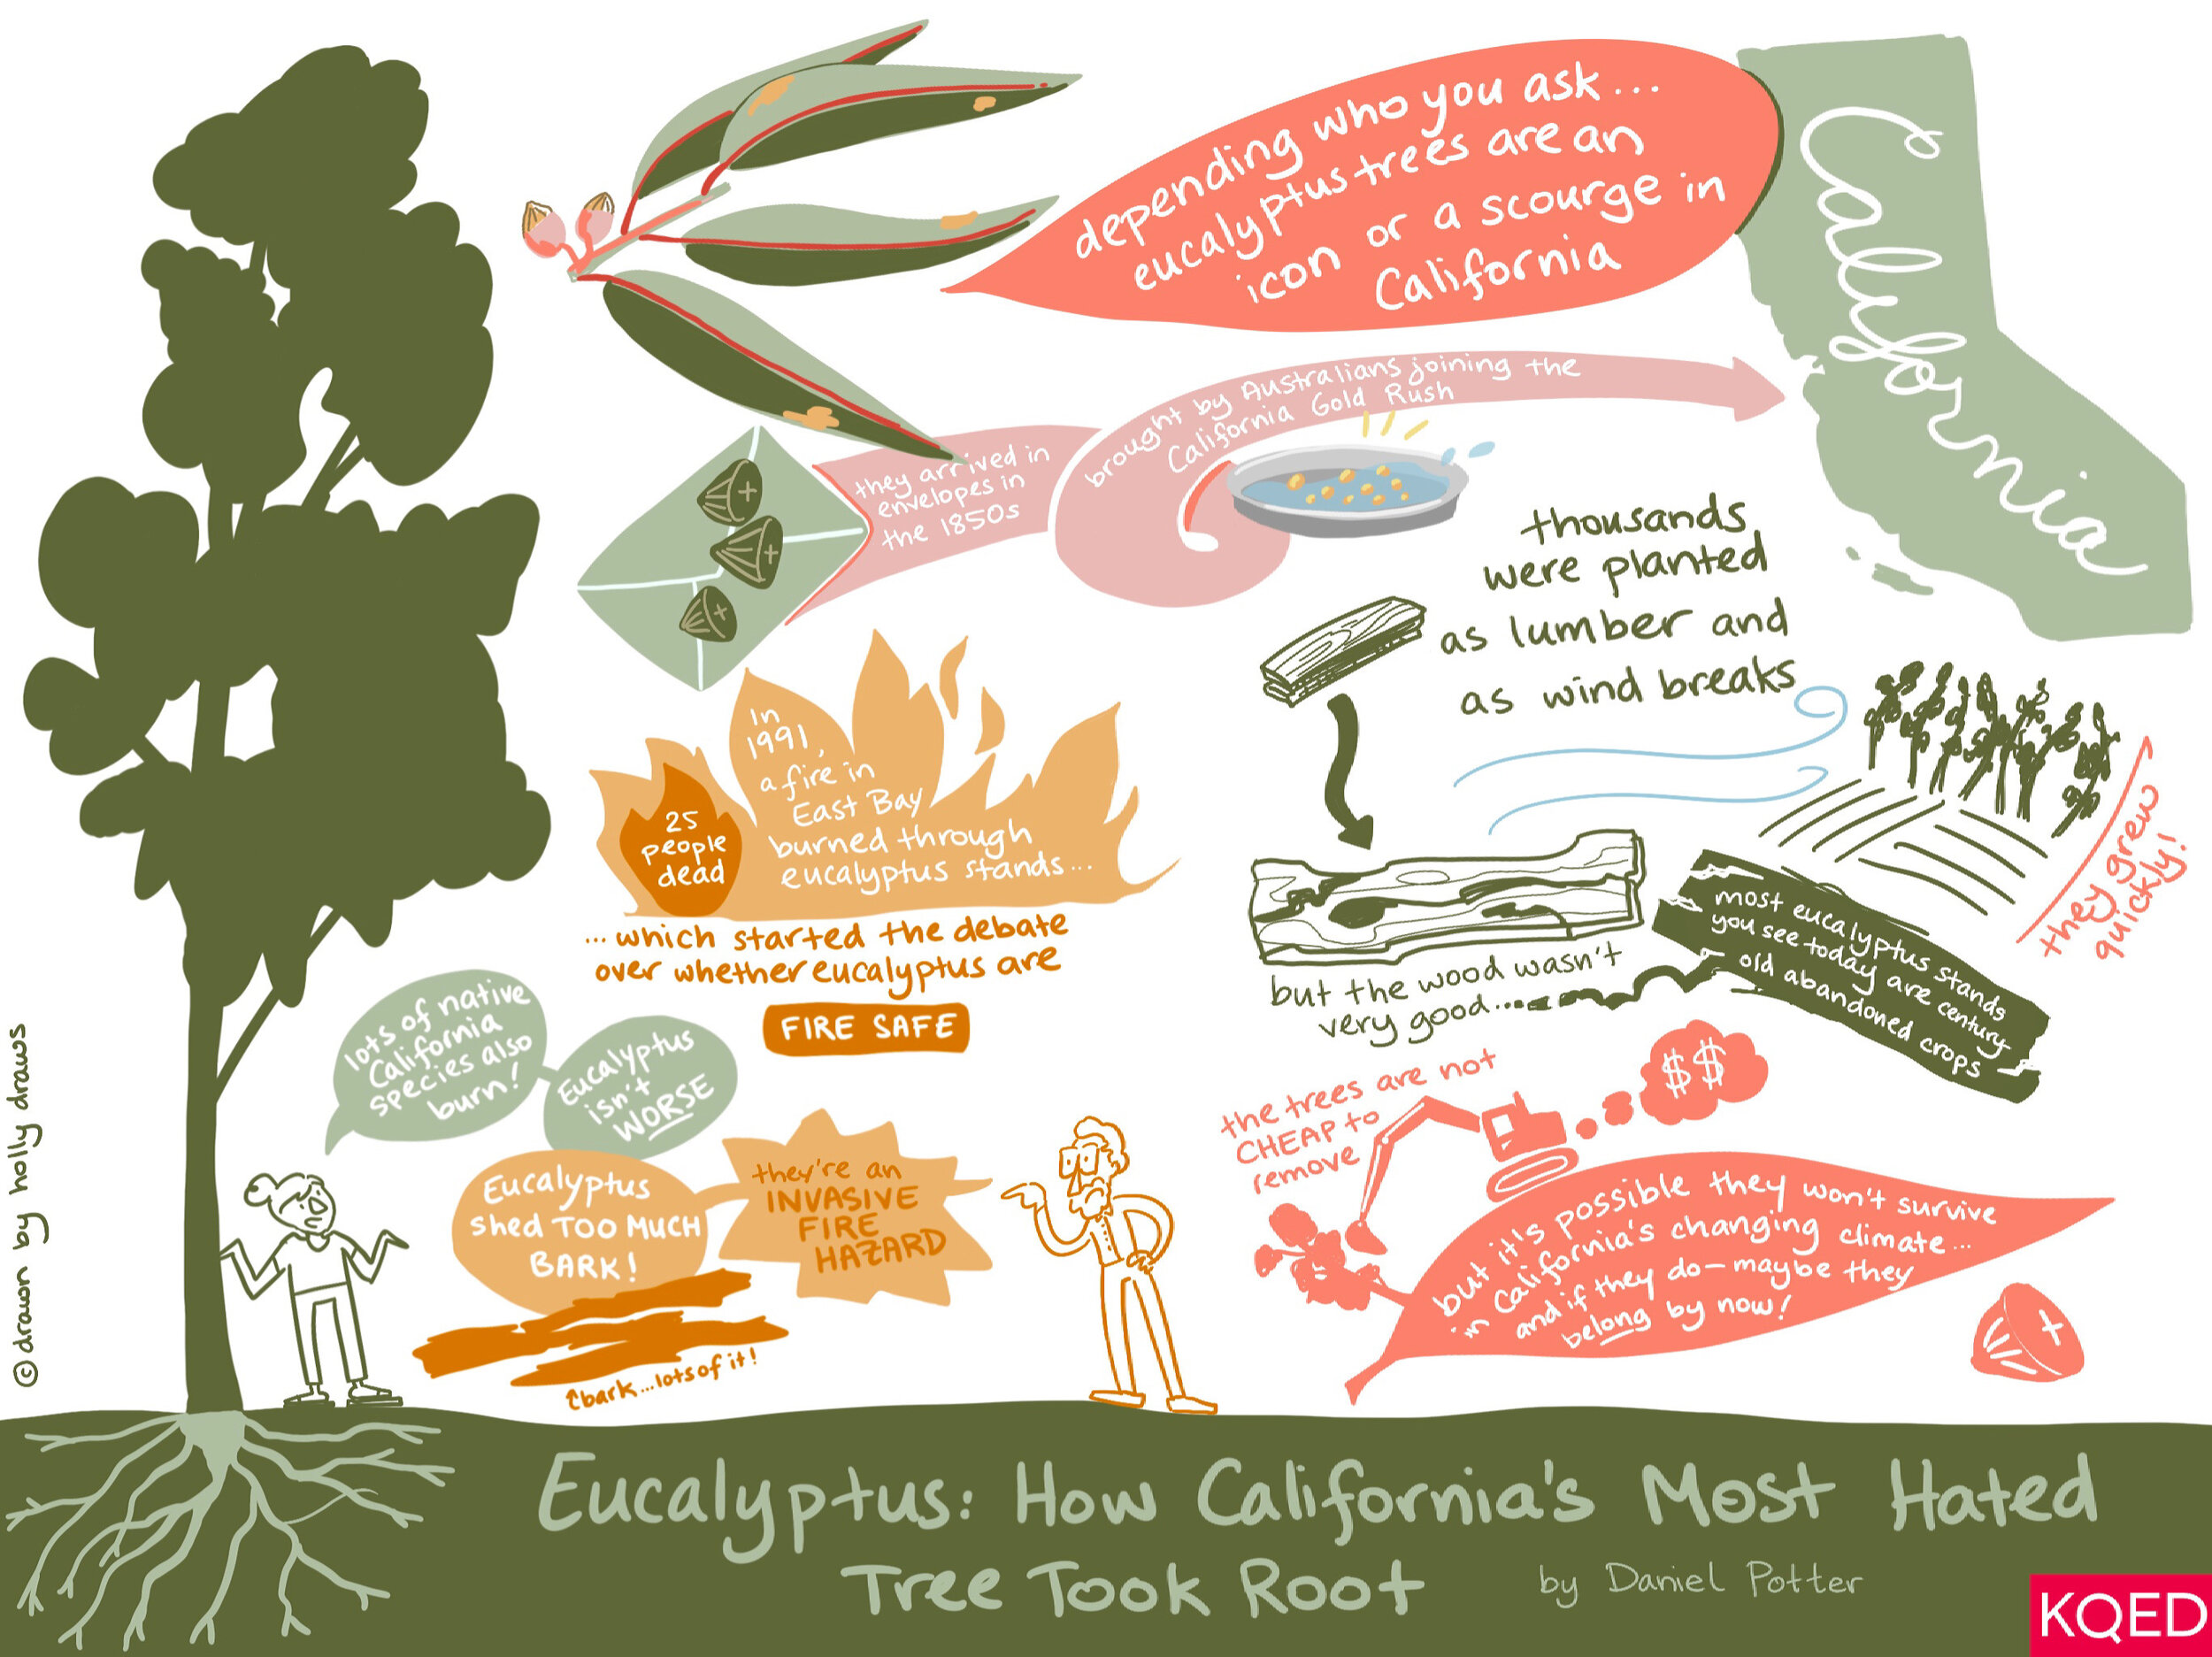 Eucalyptus: How California's Most Hated Tree Took Root